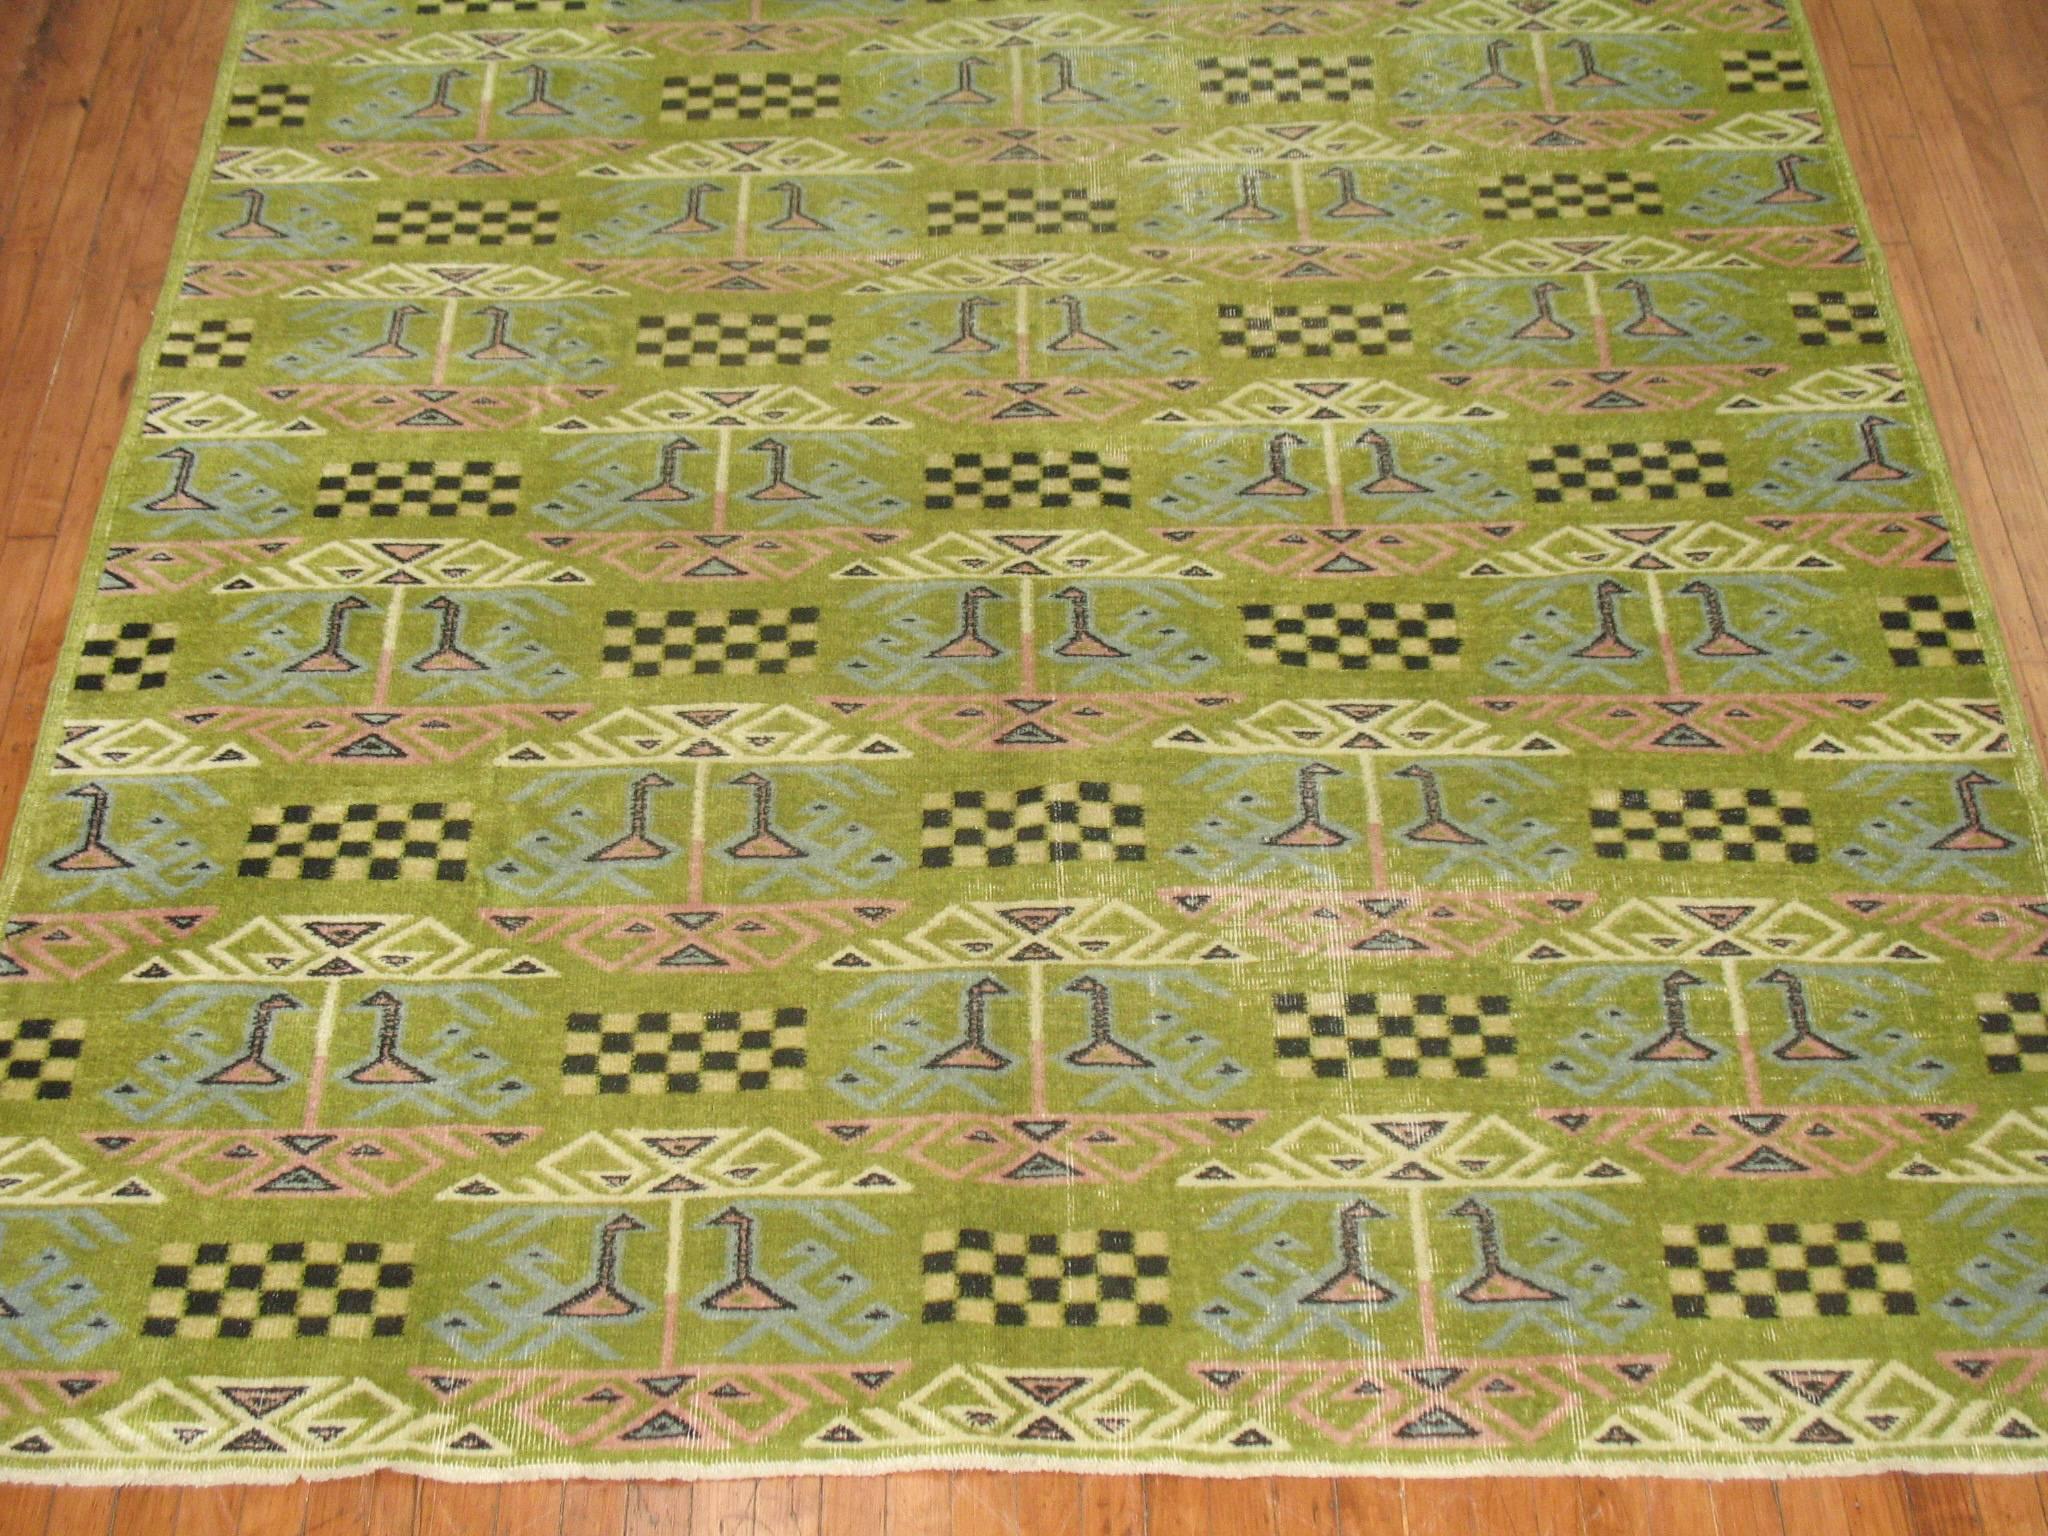 A vintage Turkish rug with an all-over swan motif on a lime green background.